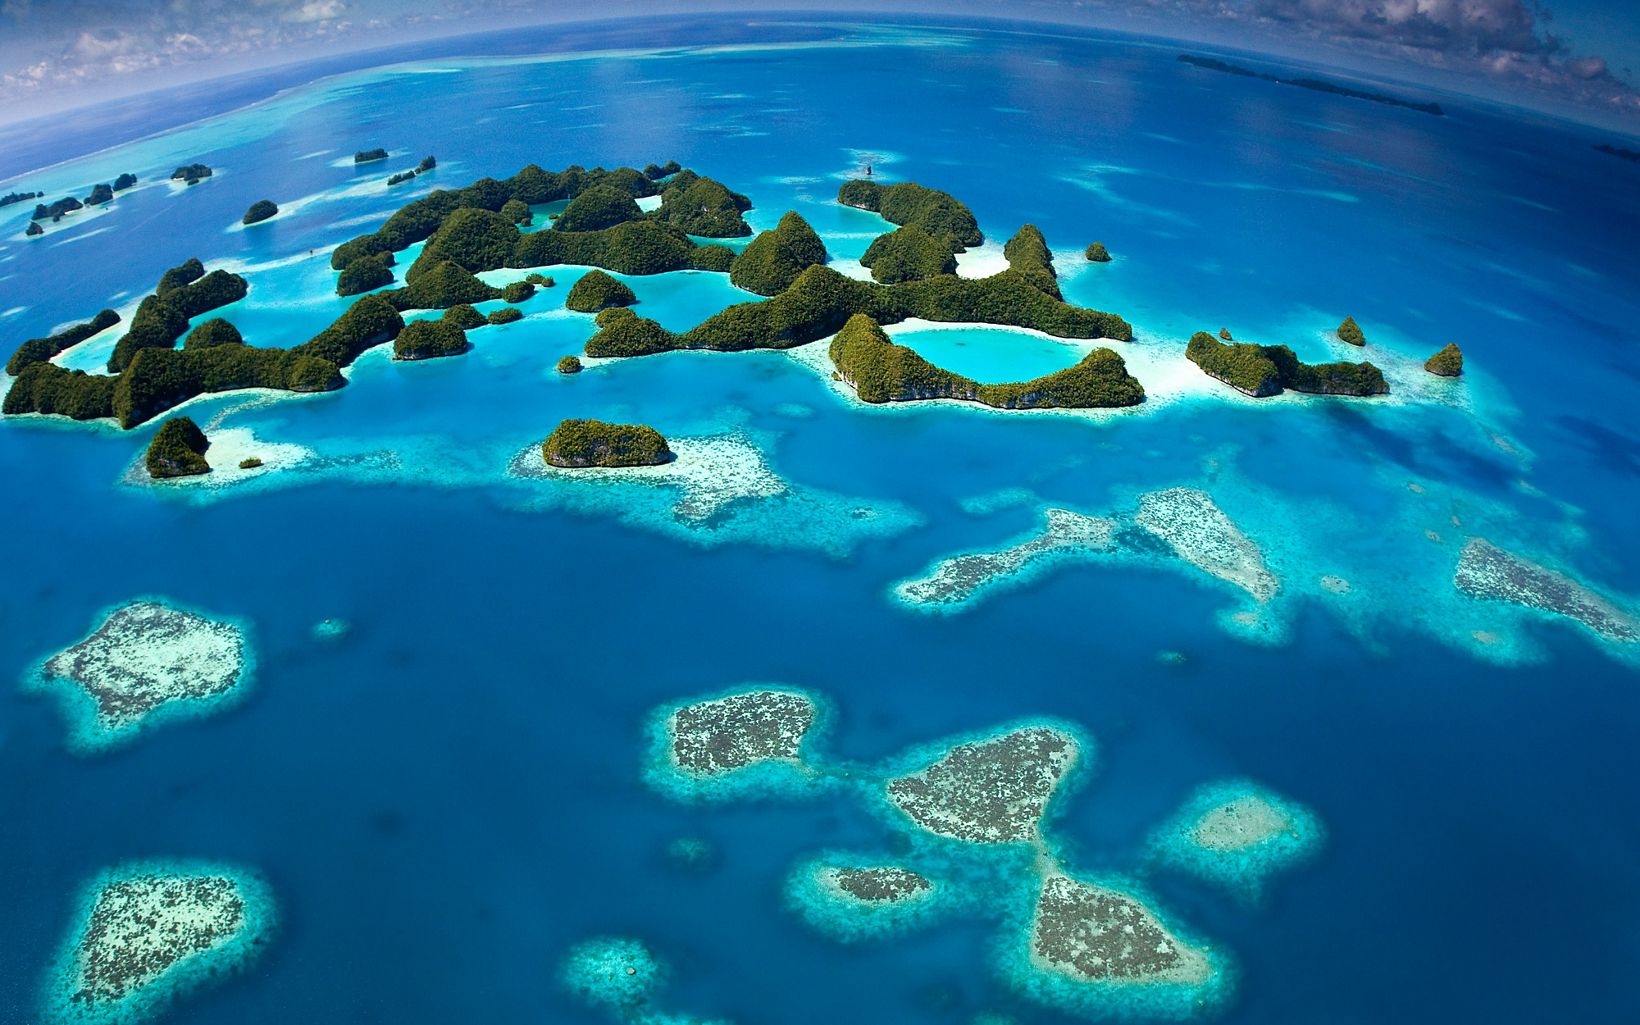 The coral reefs of Palau are part of a massive interconnected system that ties together Micronesia and the Western Pacific.